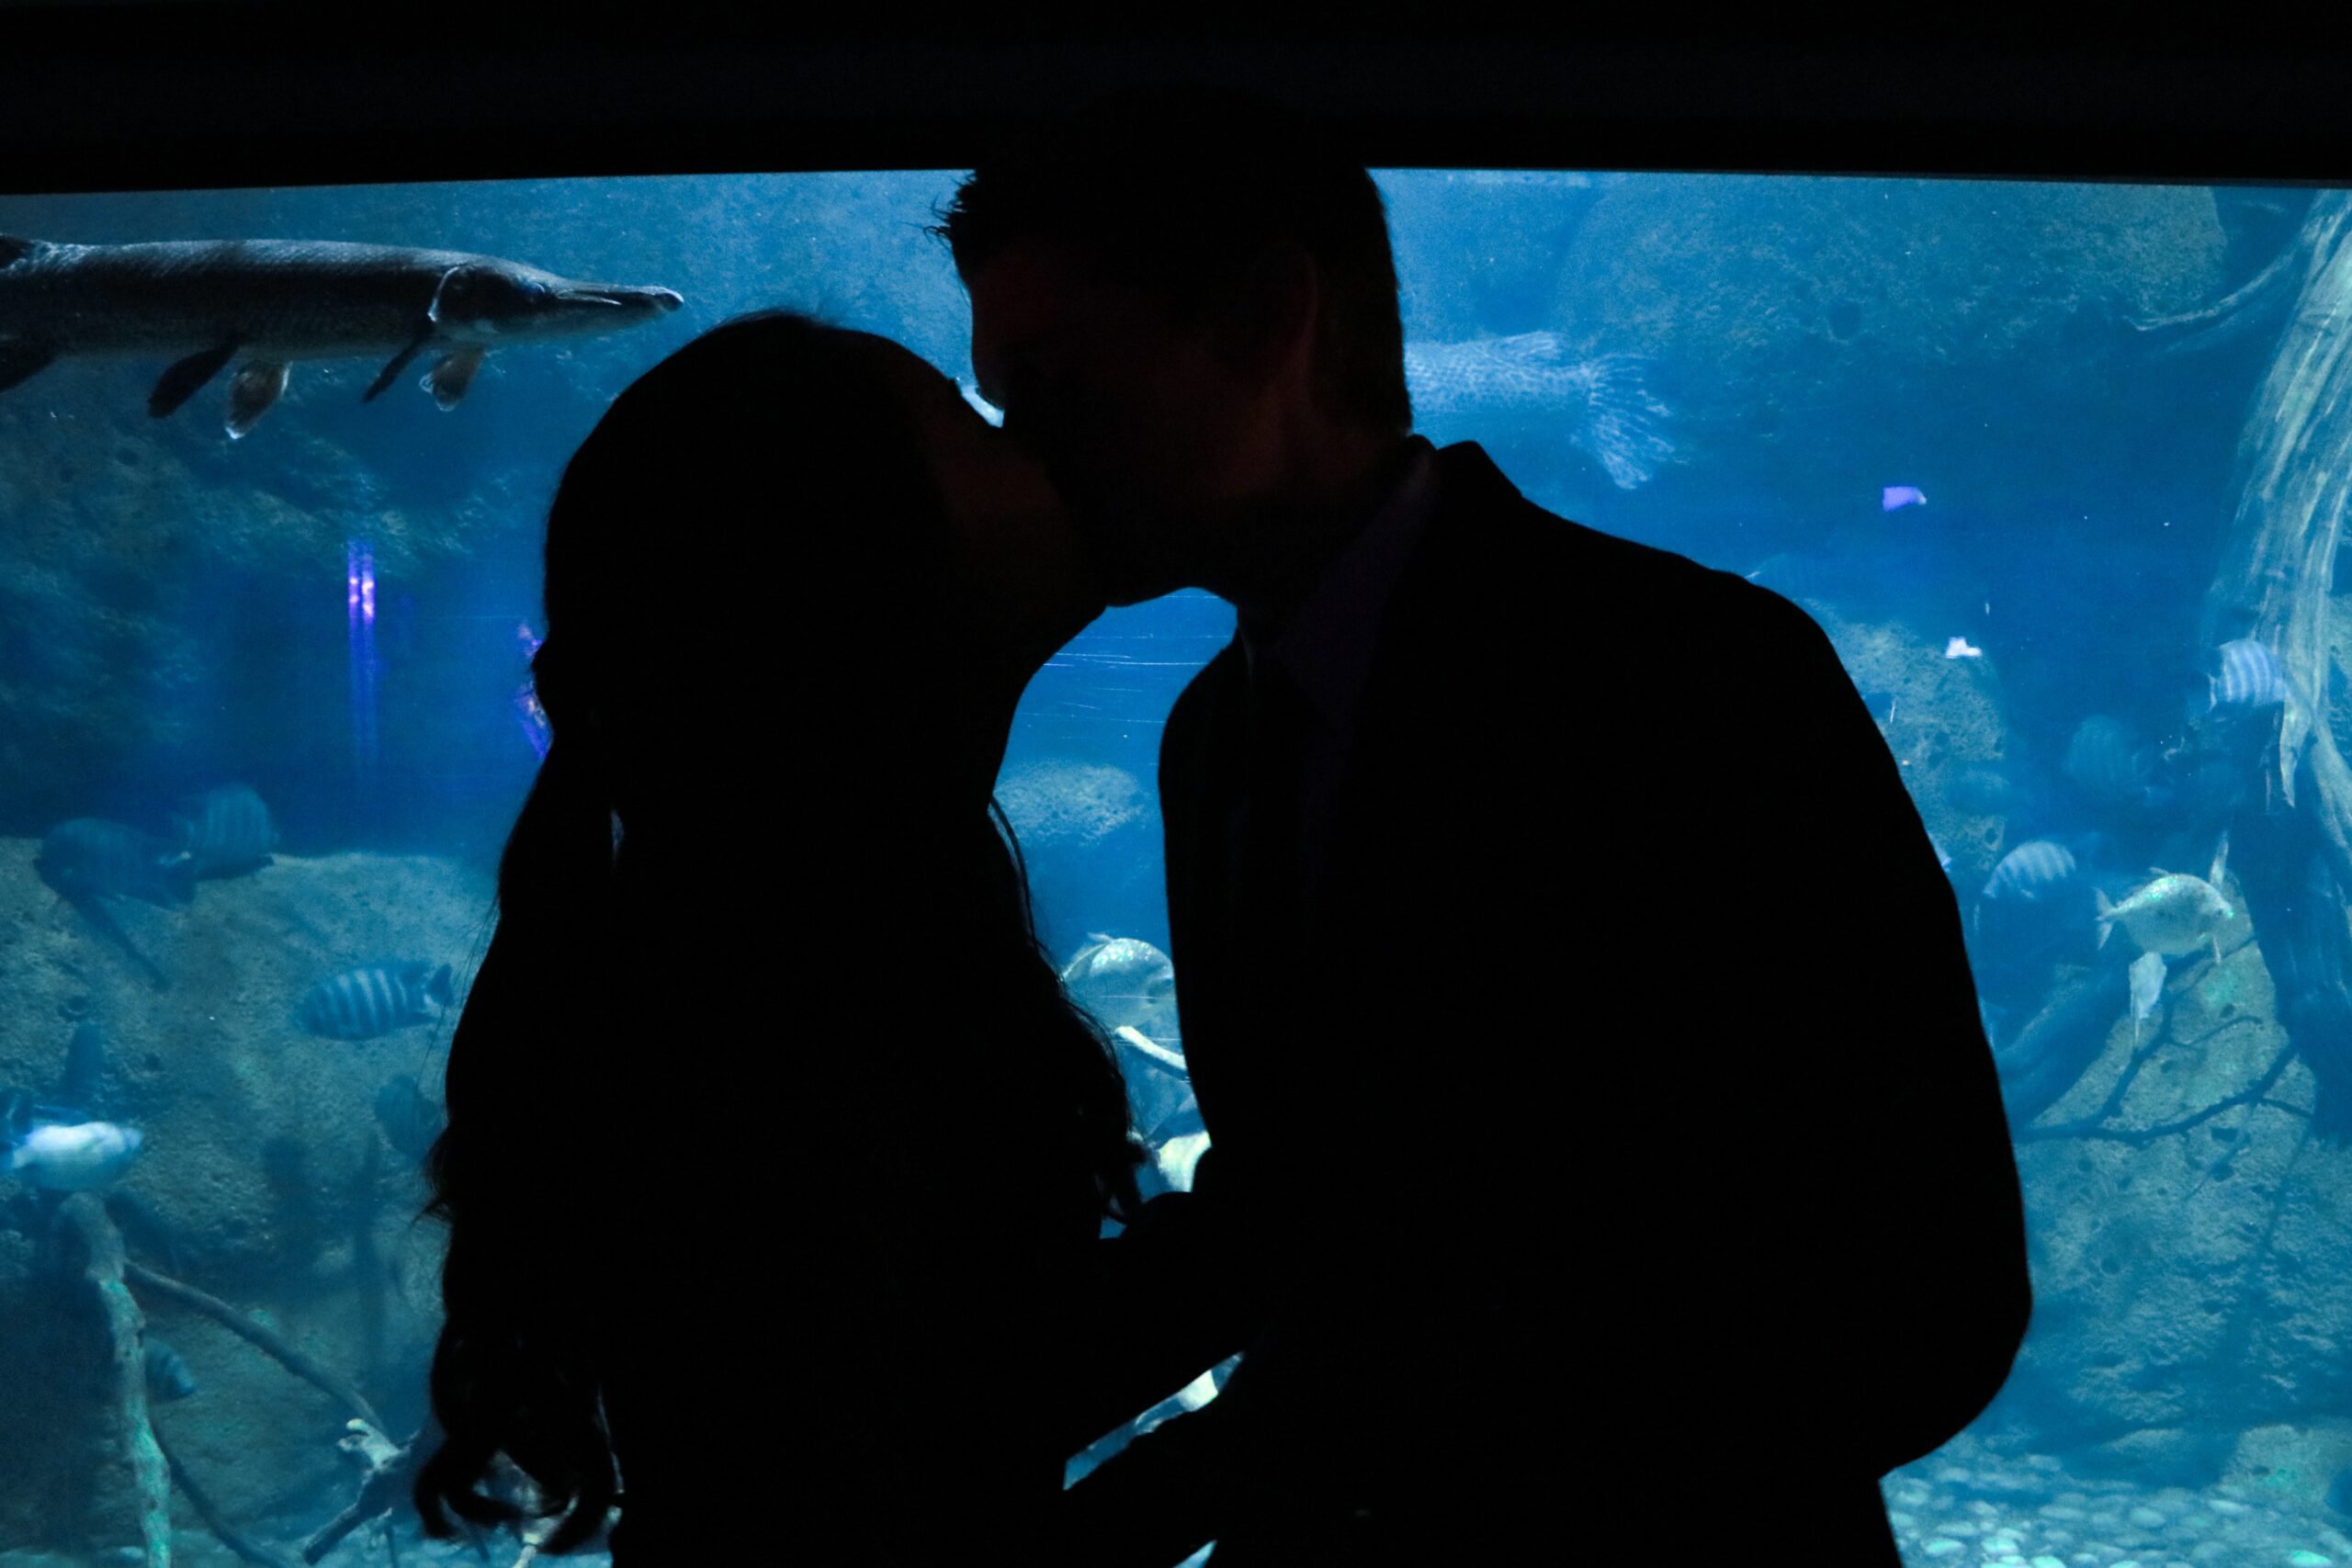 Couple kissing on a date in front of an aquarium